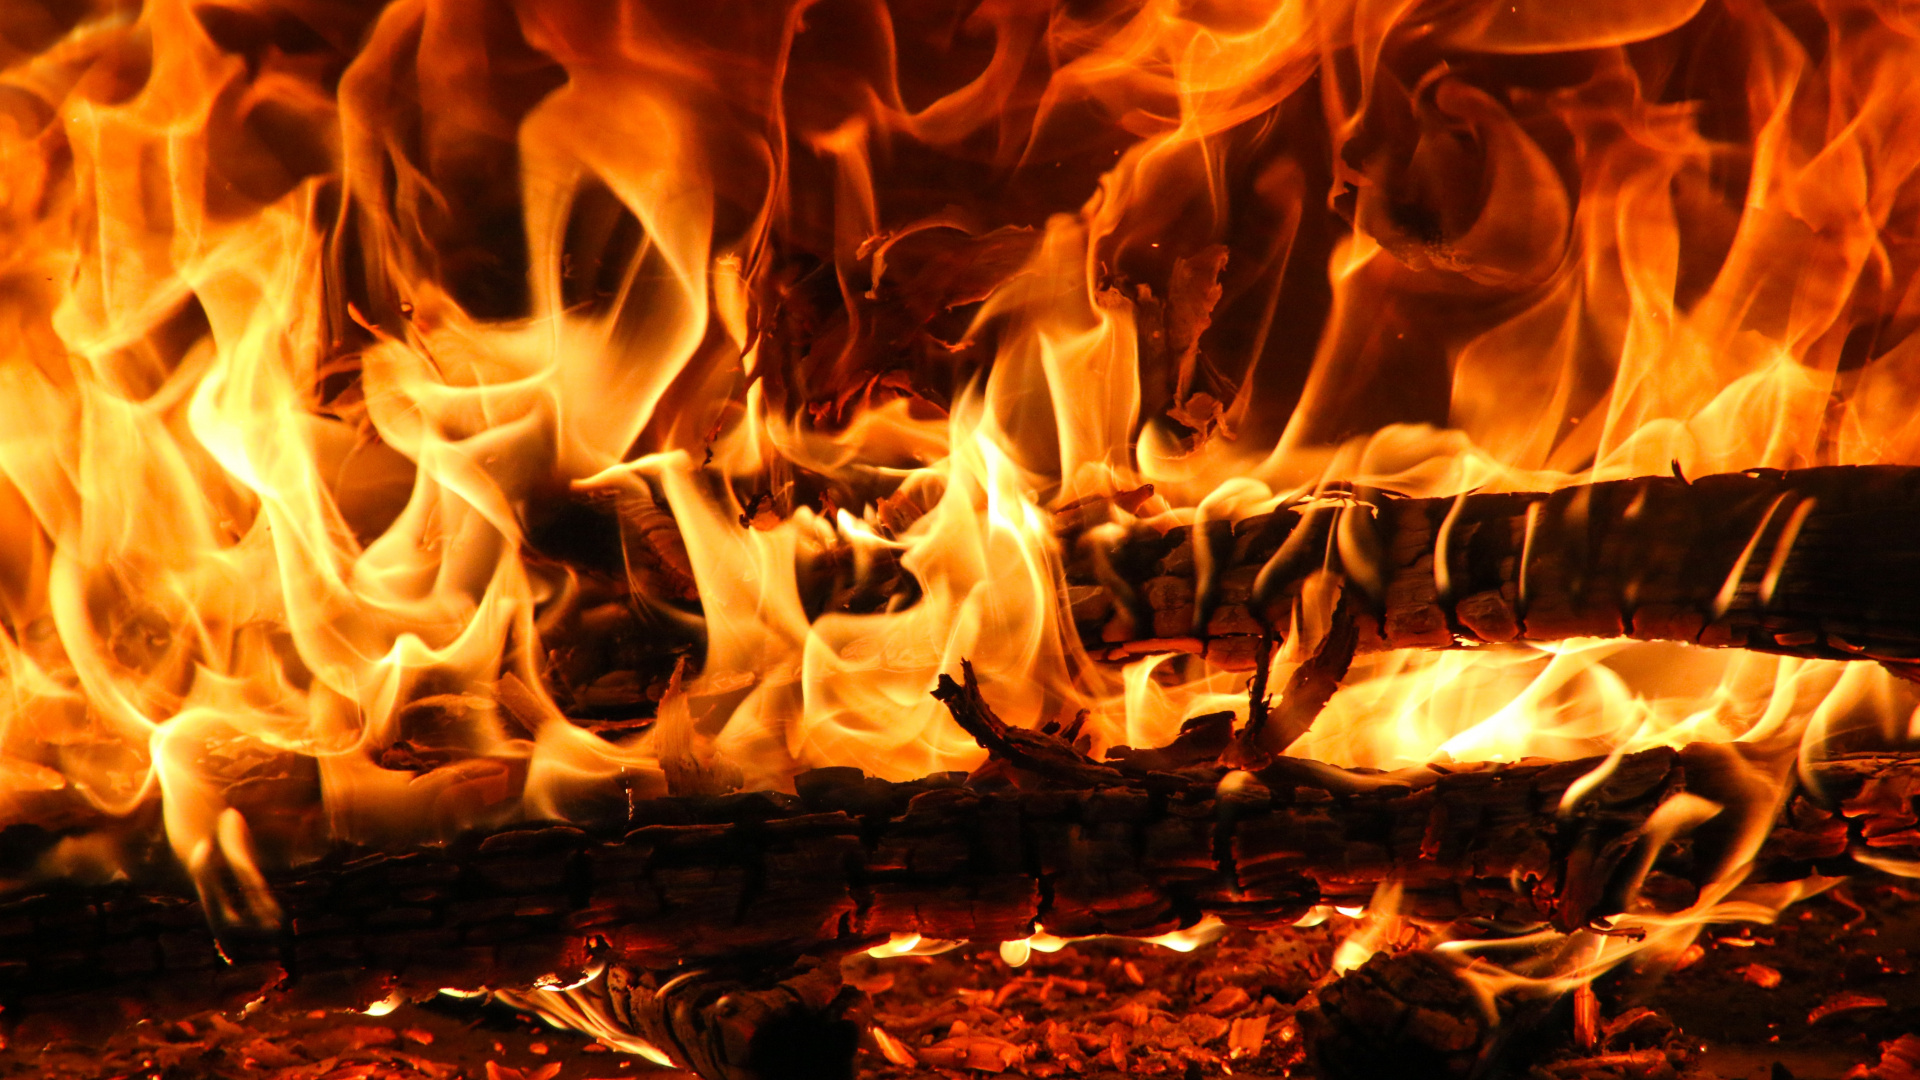 Burning Wood on Brown Soil. Wallpaper in 1920x1080 Resolution